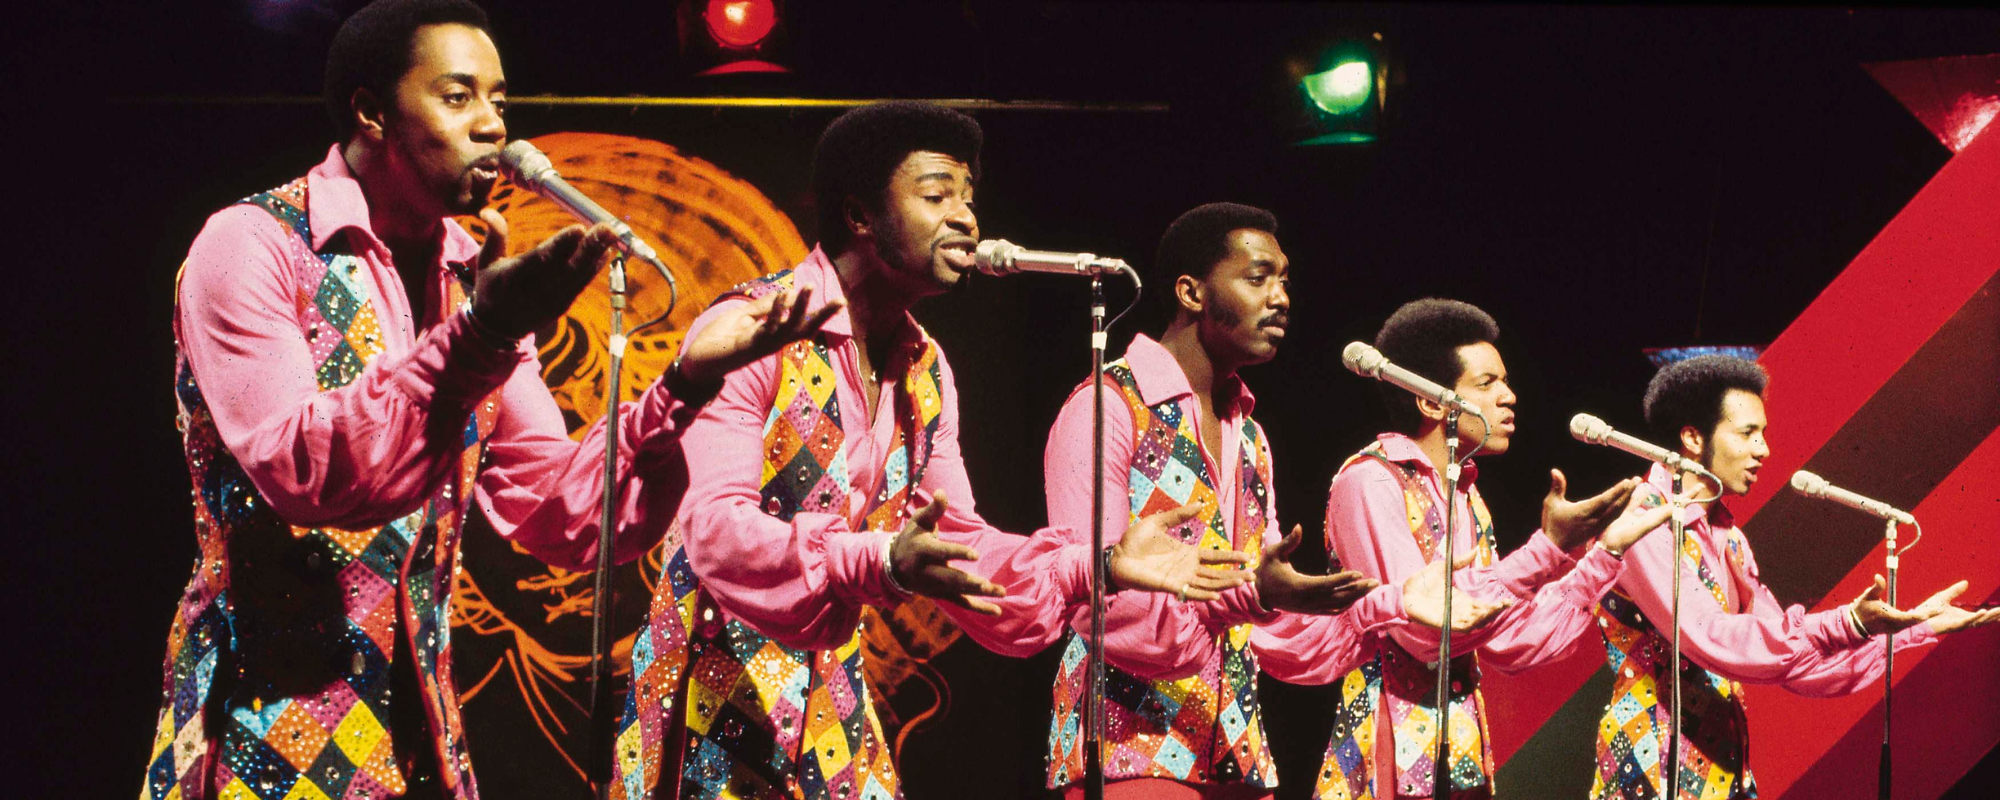 The Golden Intro and Motown Hustle That Informed the Meaning Behind “My Girl” by The Temptations